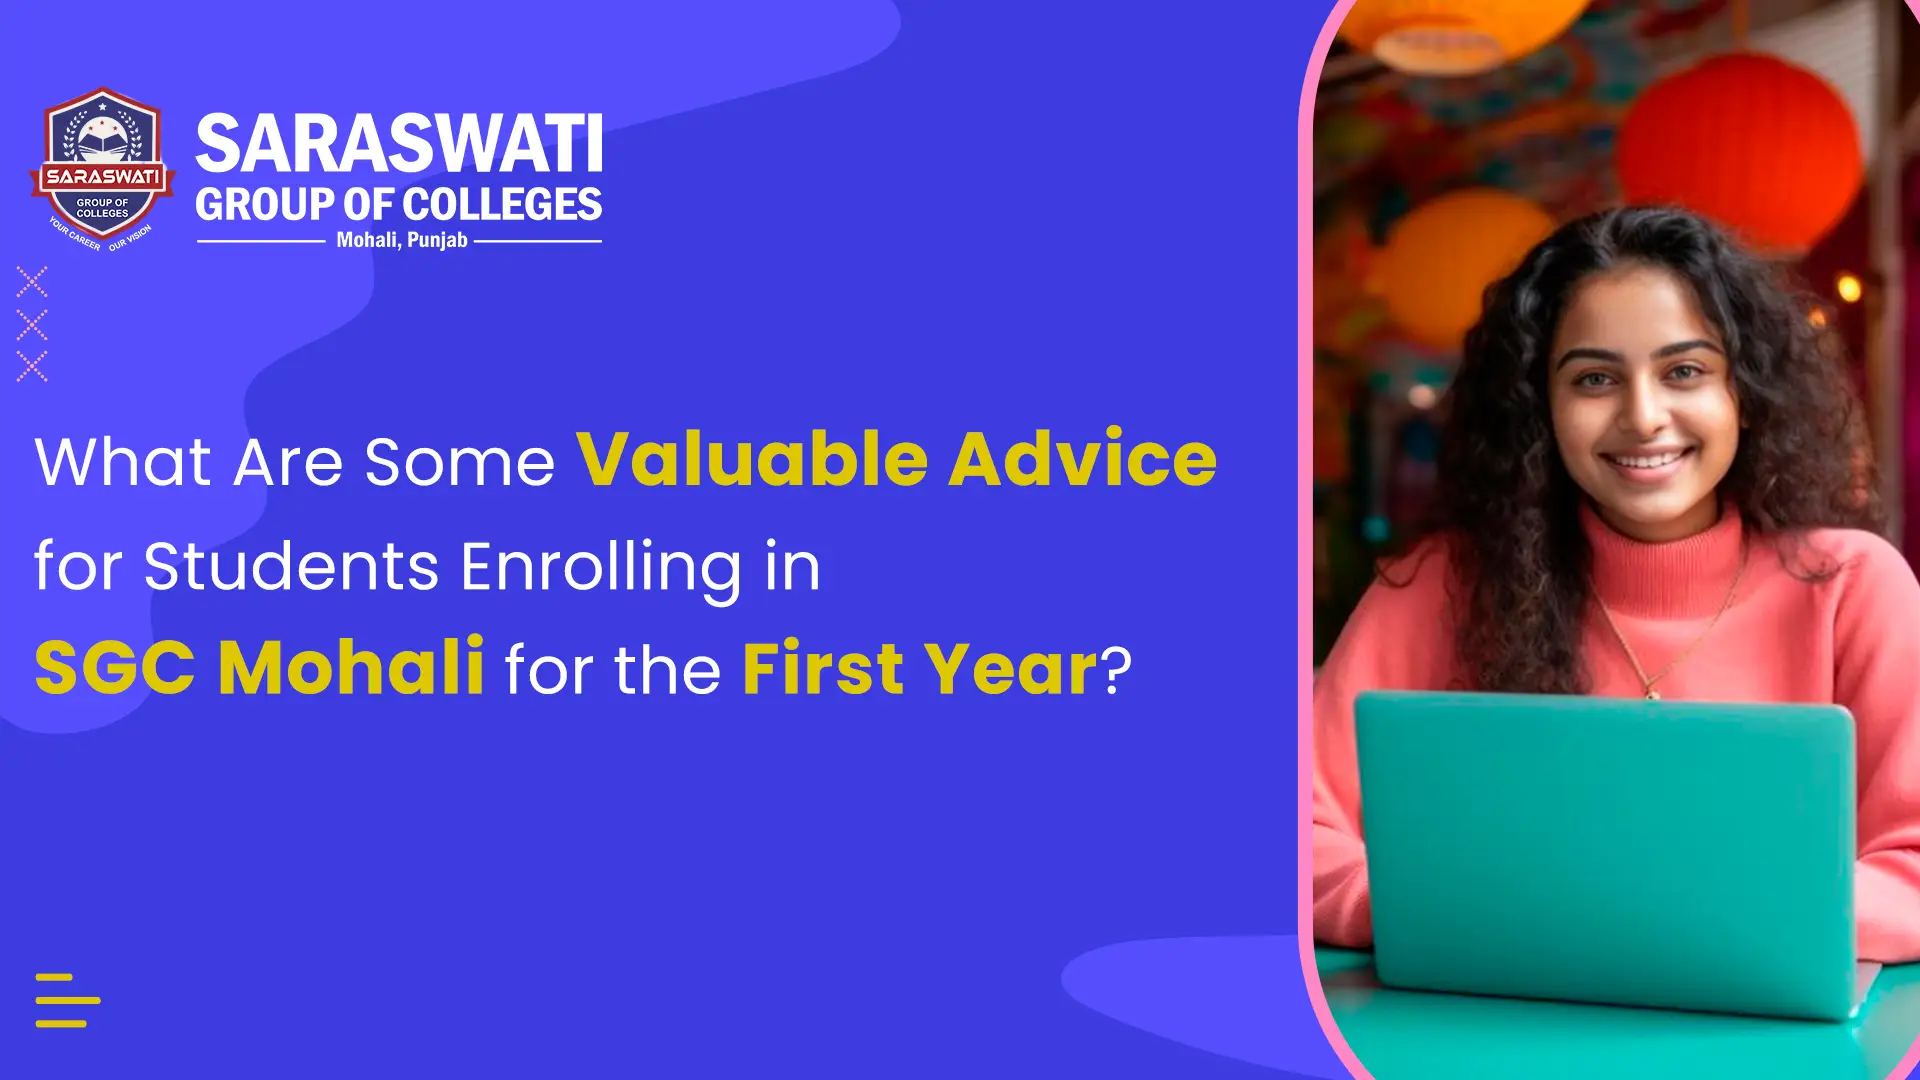 What Are Some Valuable Advice for Students Enrolling in SGC Mohali for the First Time?